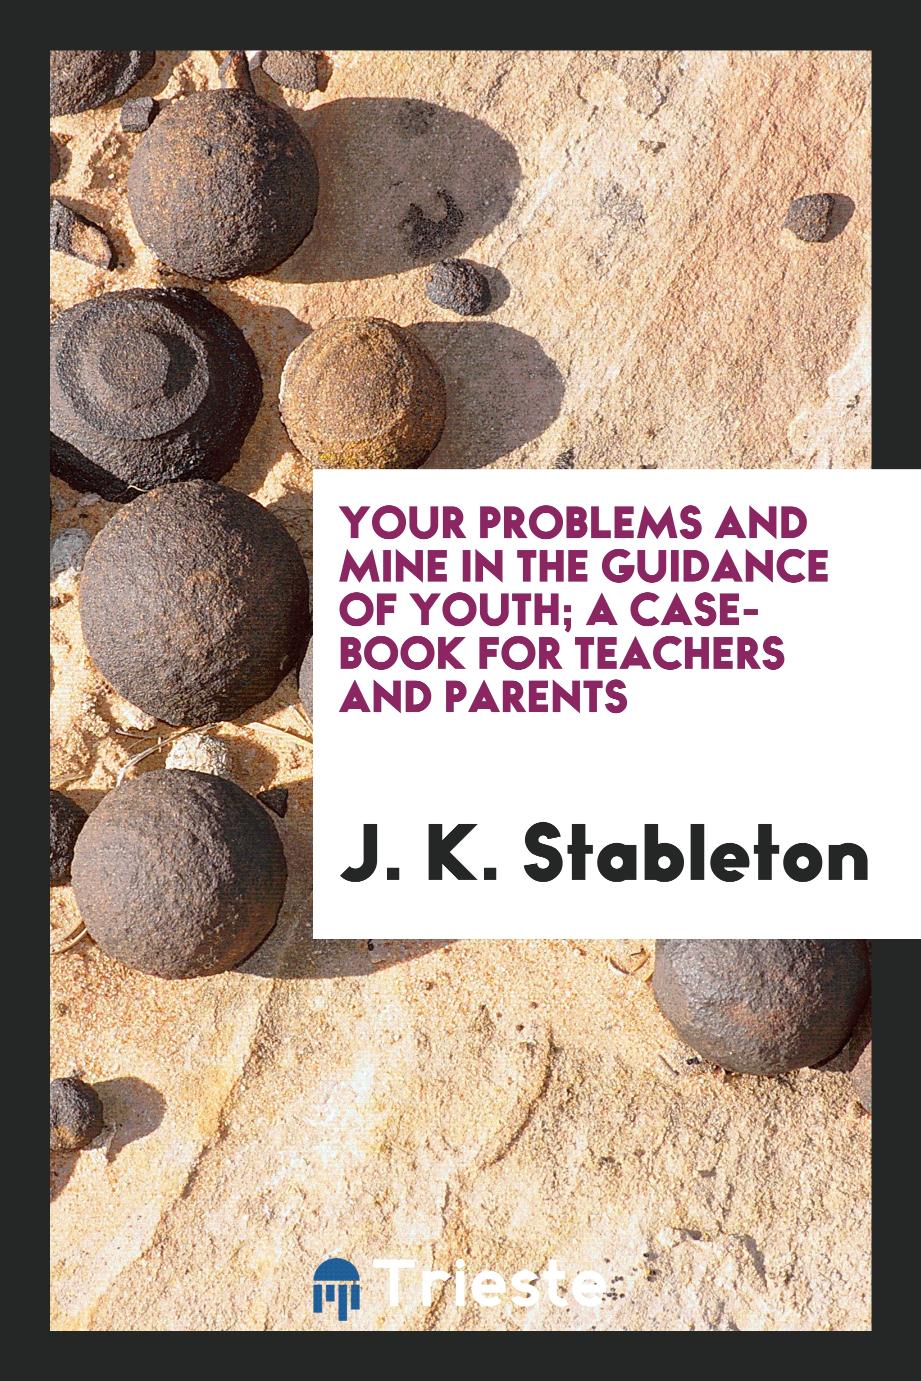 Your problems and mine in the guidance of youth; a case-book for teachers and parents